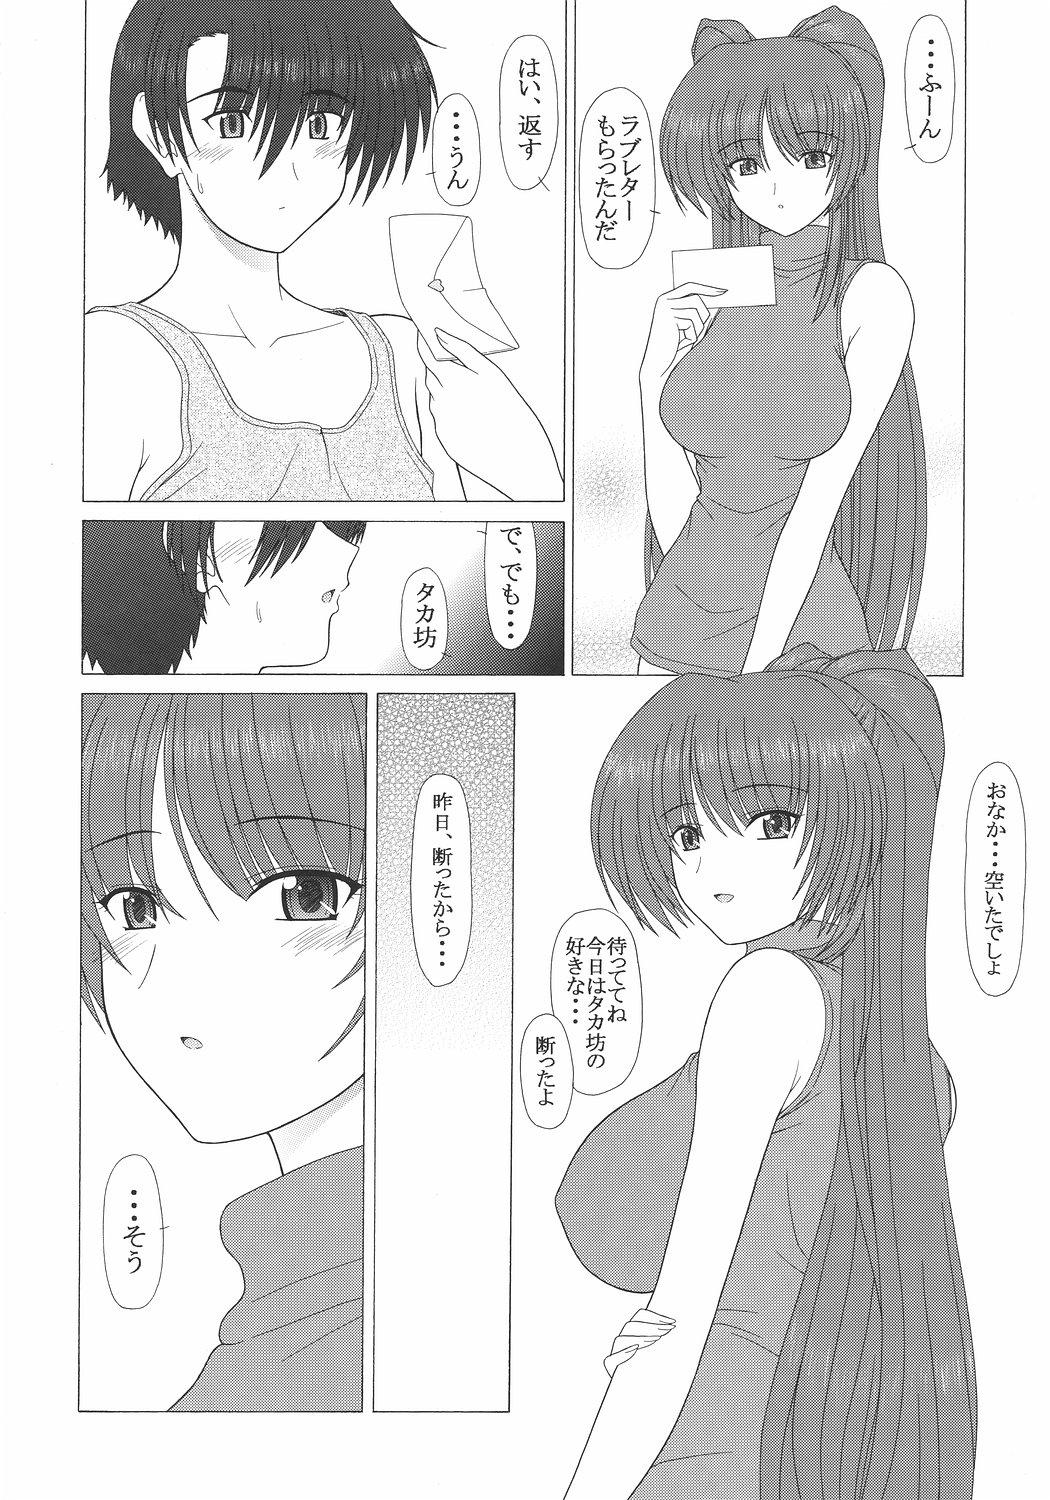 Freckles PURE NEXT GENERATION Vol. 7 Tama-nee to Love Love - Toheart2 Blond - Page 7